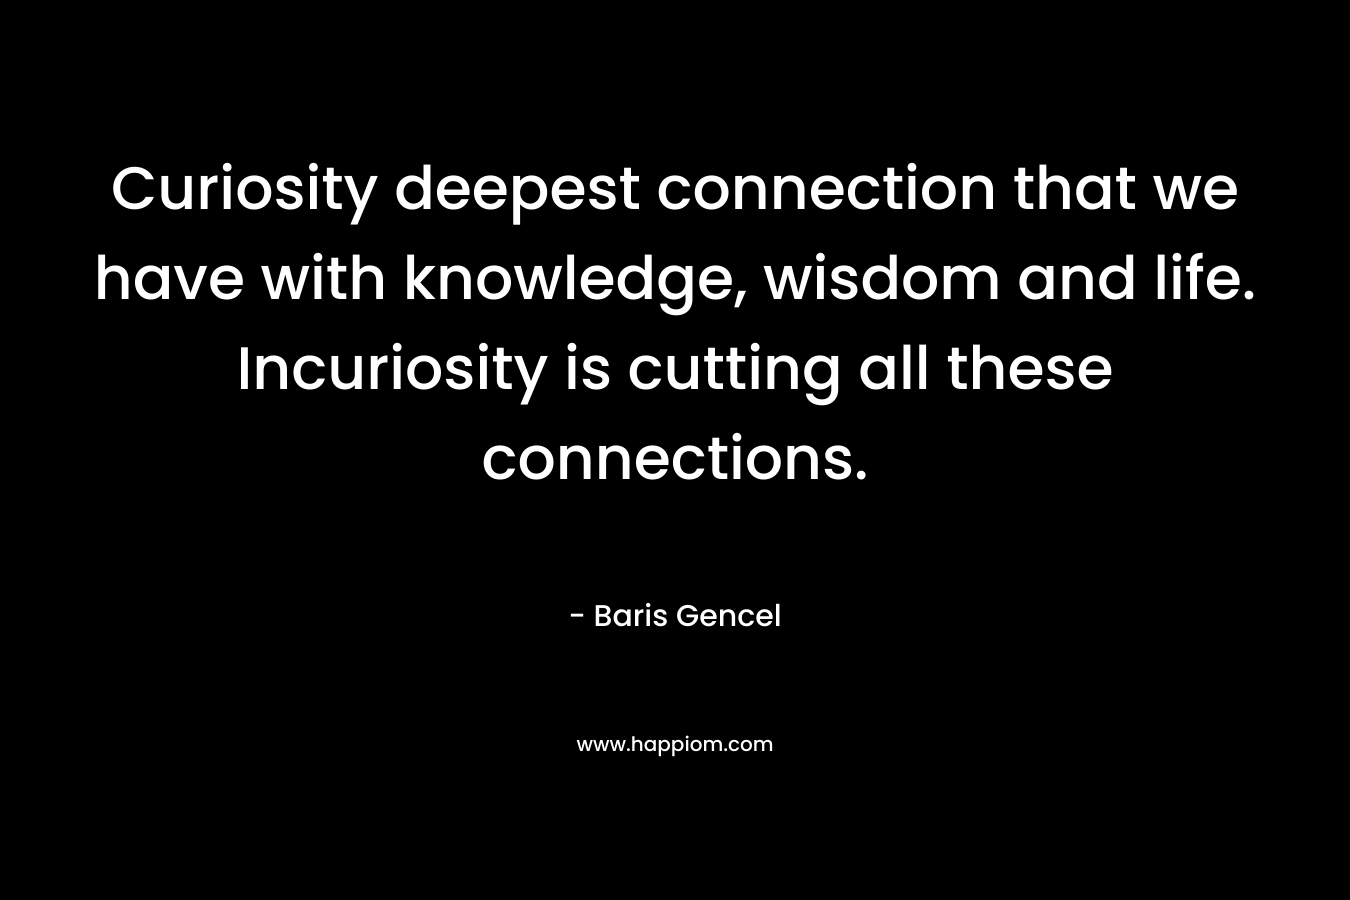 Curiosity deepest connection that we have with knowledge, wisdom and life. Incuriosity is cutting all these connections. – Baris Gencel